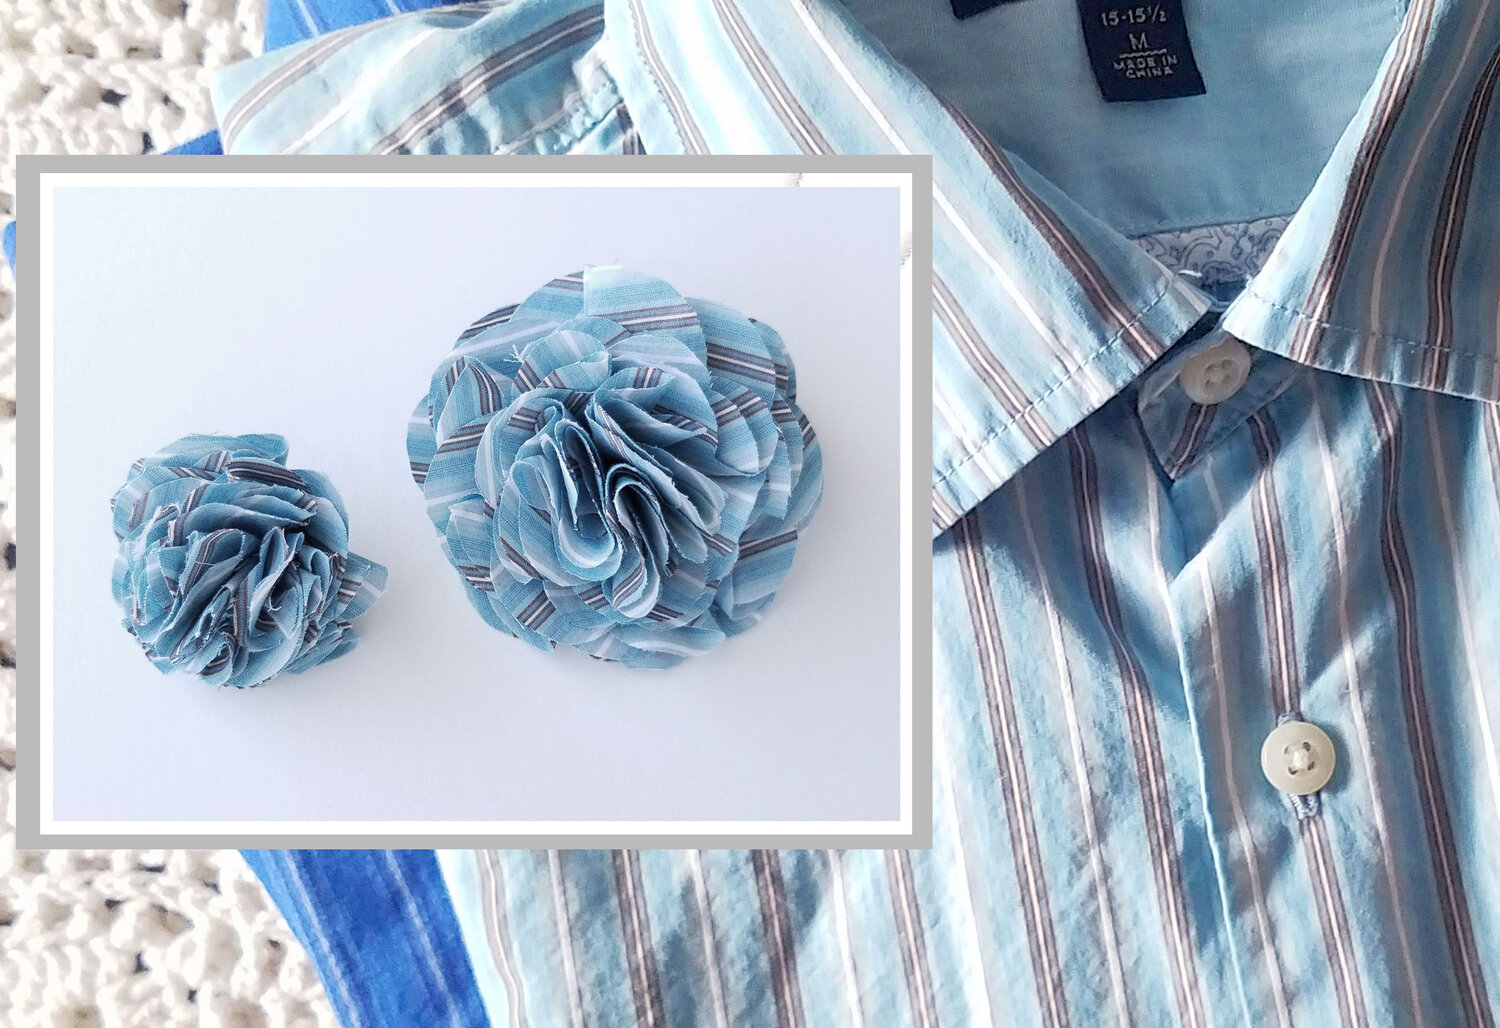 Custom Flower Lapel Pins from Clothing — Memorable Handmade Gifts